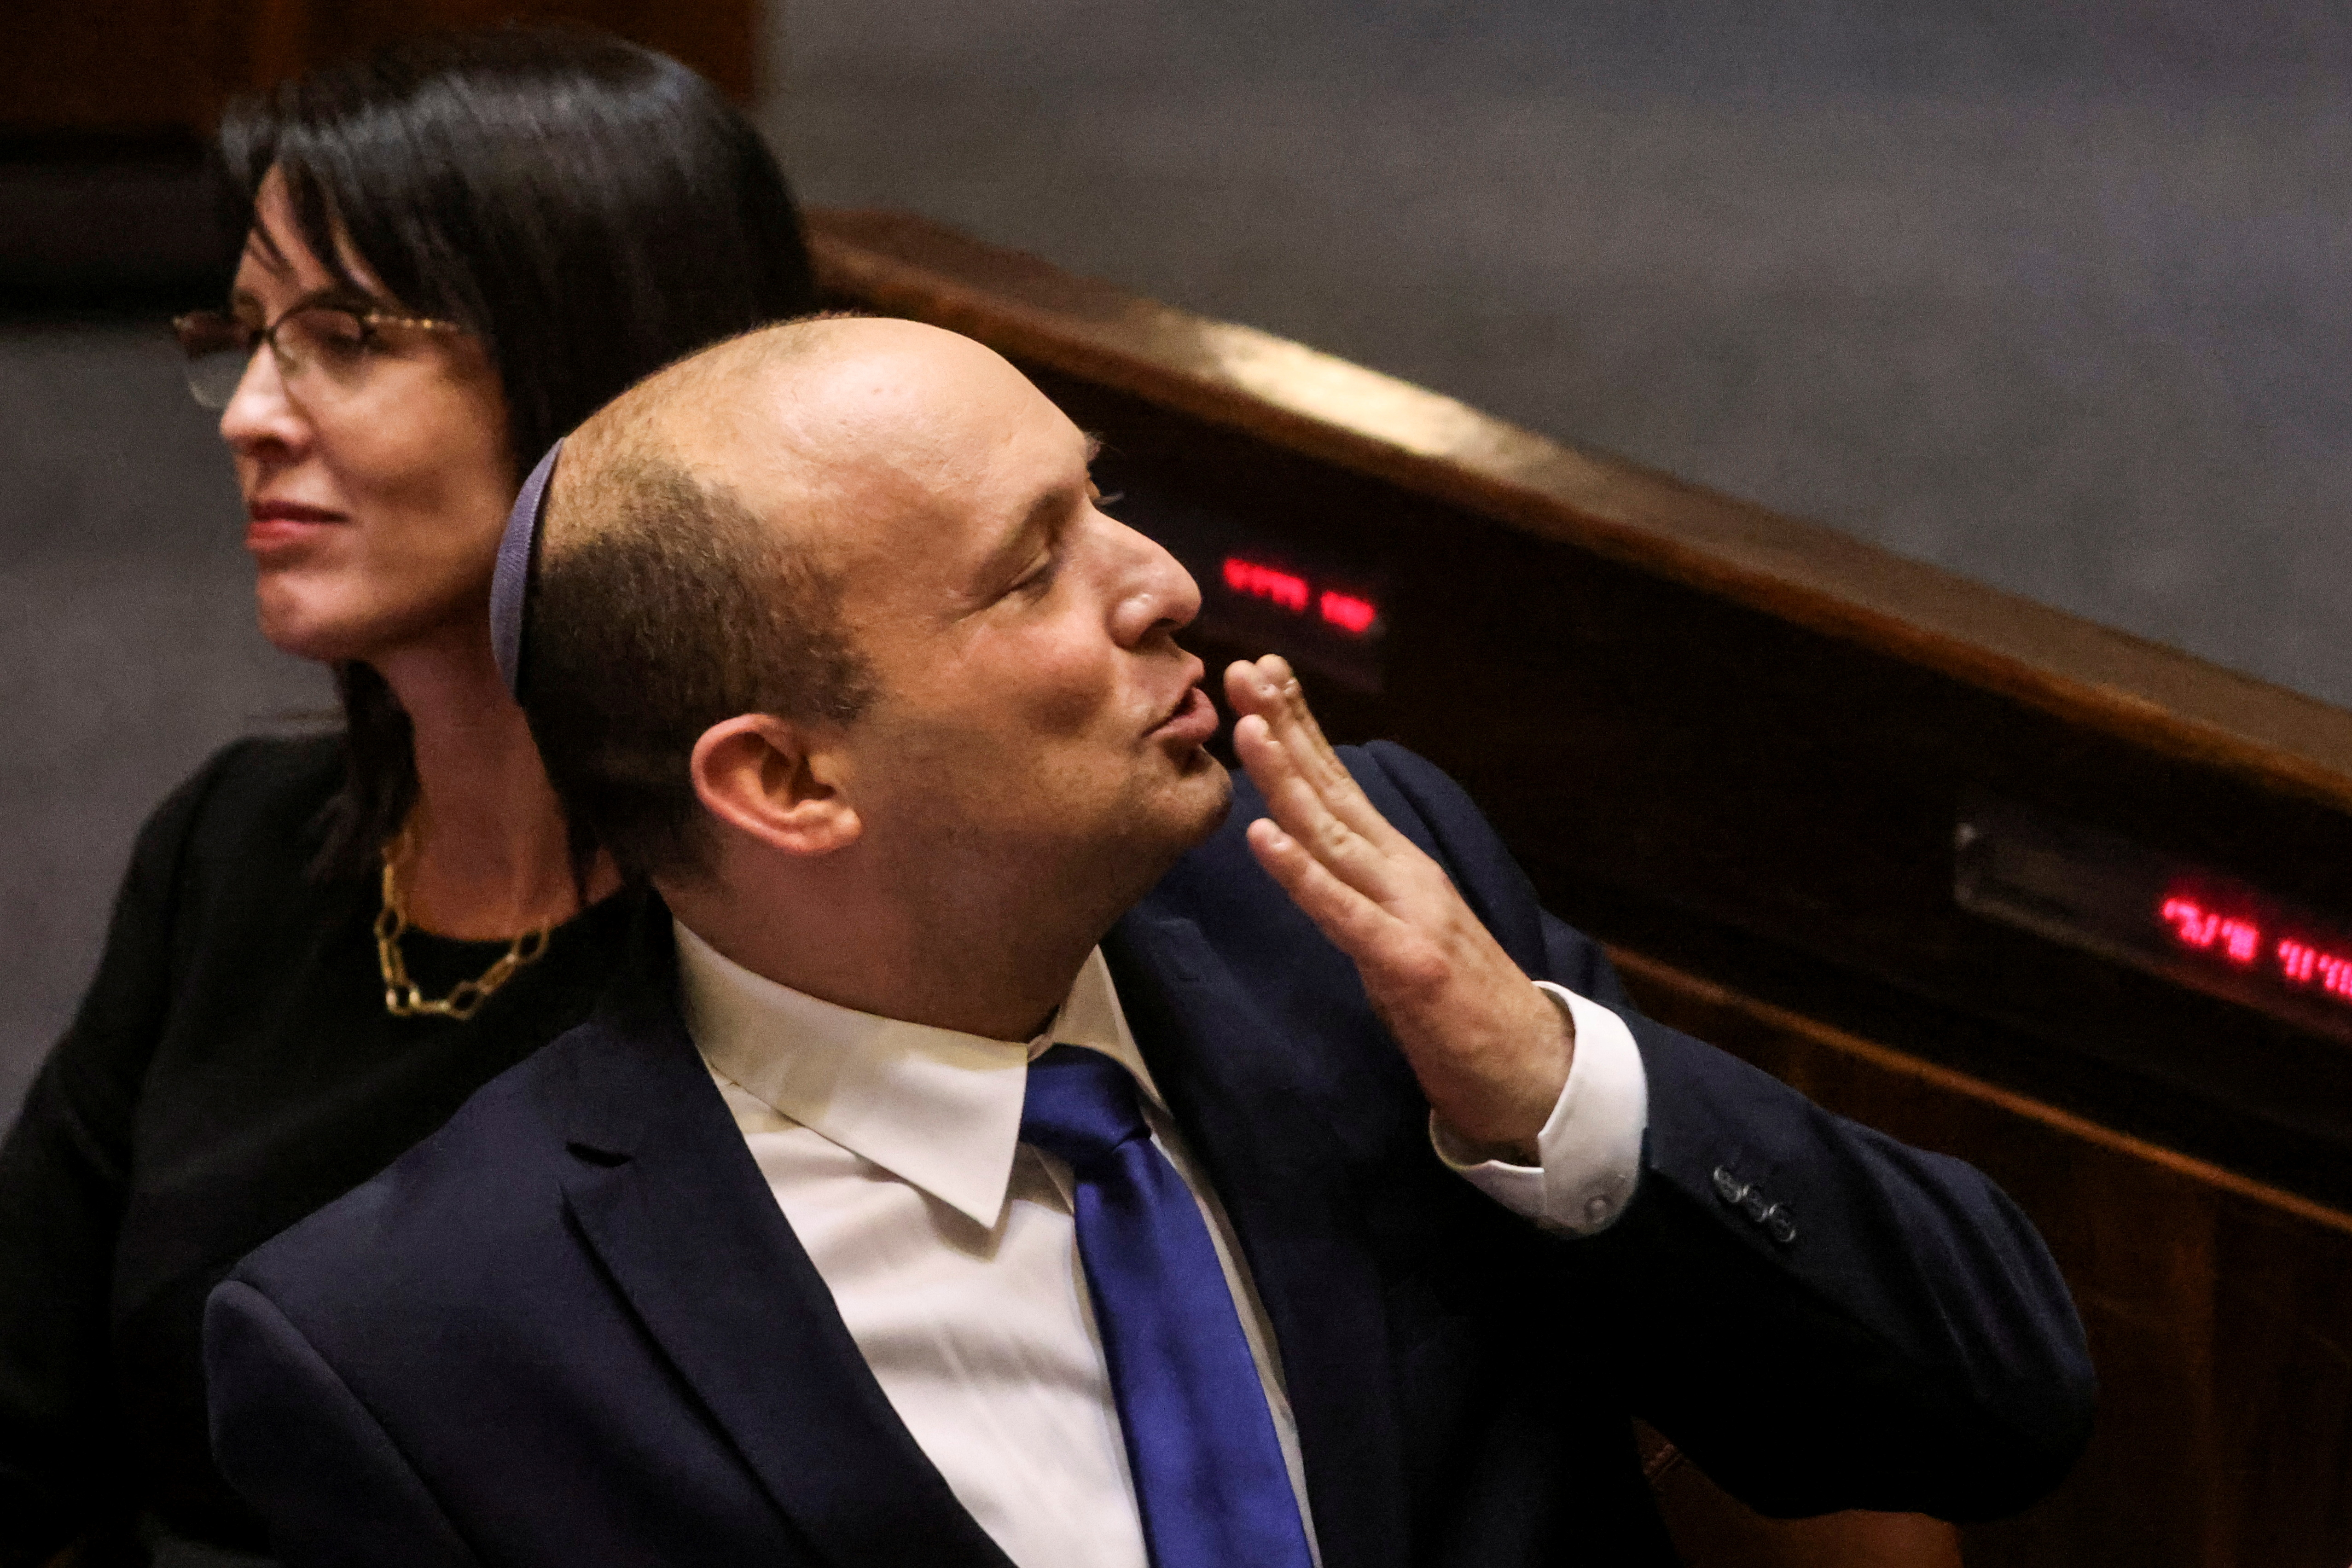 Naftali Bennett, Prime Minister-designate, gestures at the Knesset, Israel's parliament, during a special session whereby a confidence vote will be held to approve and swear-in a new coalition government, in Jerusalem